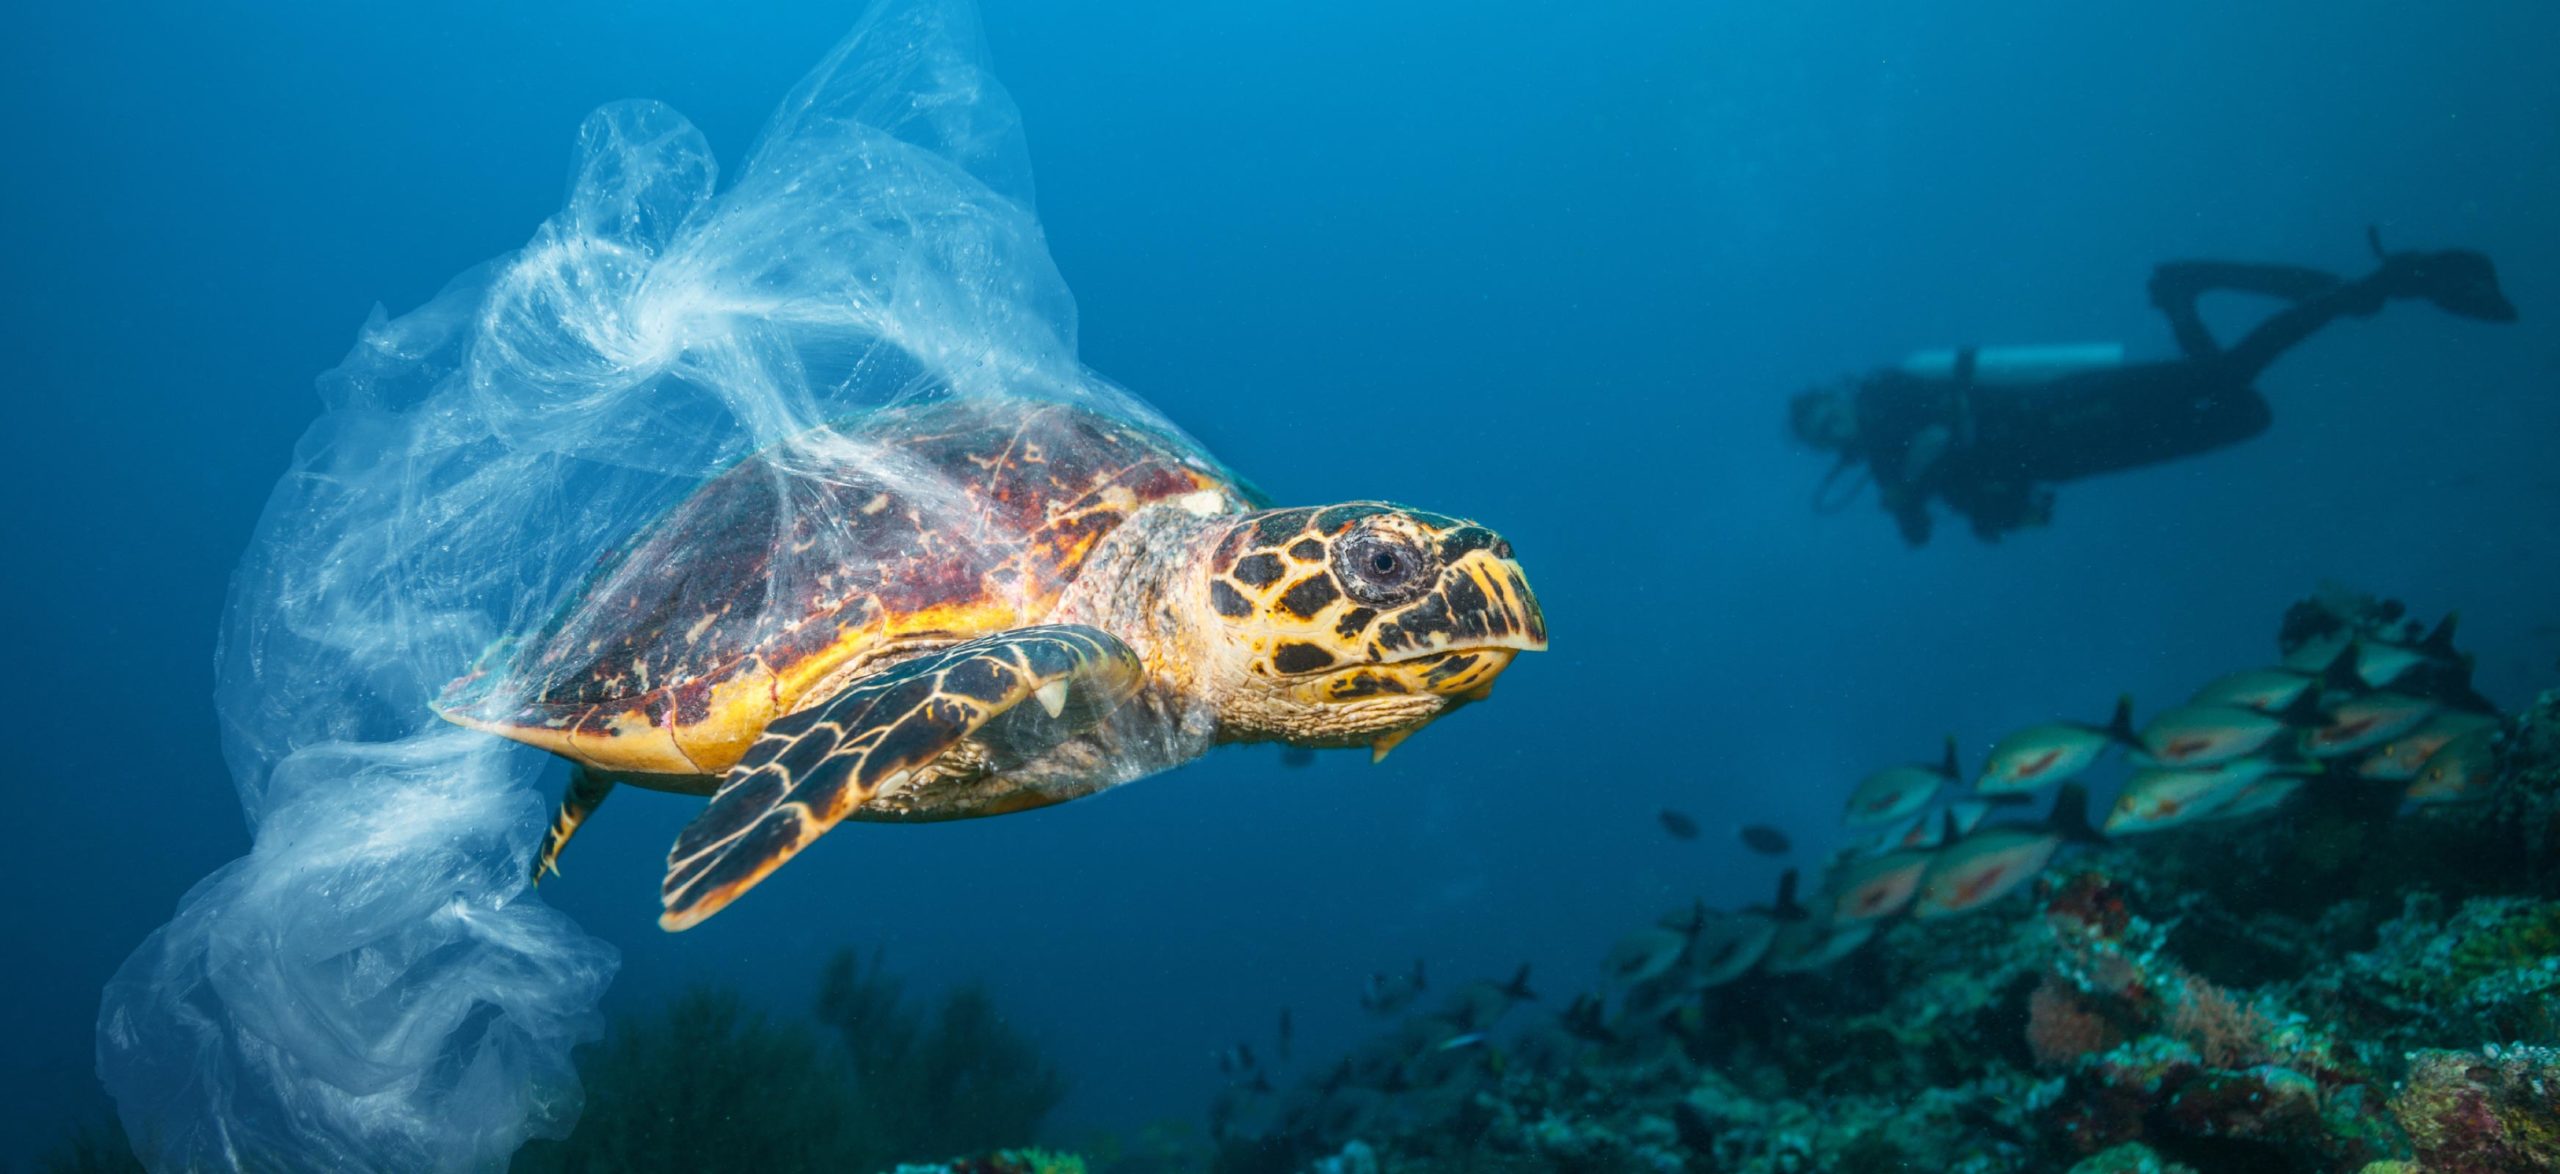 Sea turtle swimming next to tiger with plastic bag caught in its shell